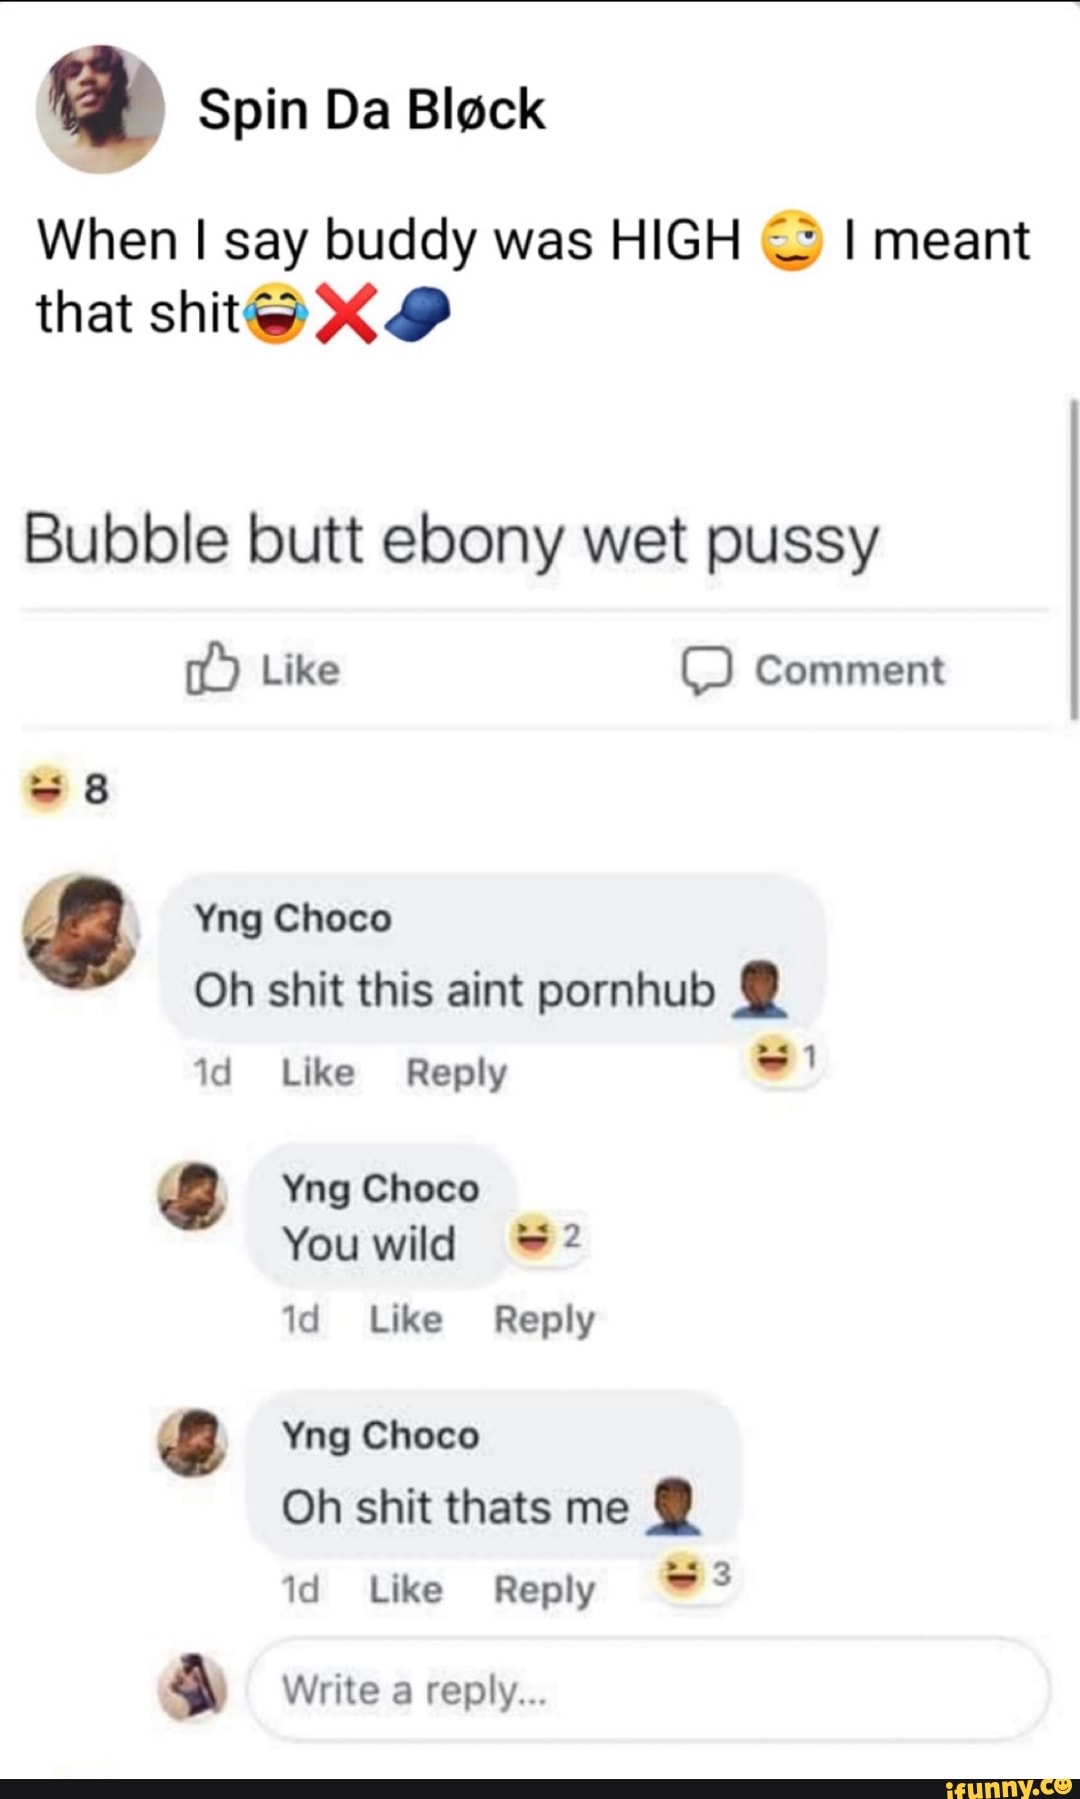 Black Bubble Butt Wet - Spin Da Black When I say buddy was HIGH I meant that shit@ Bubble butt ebony